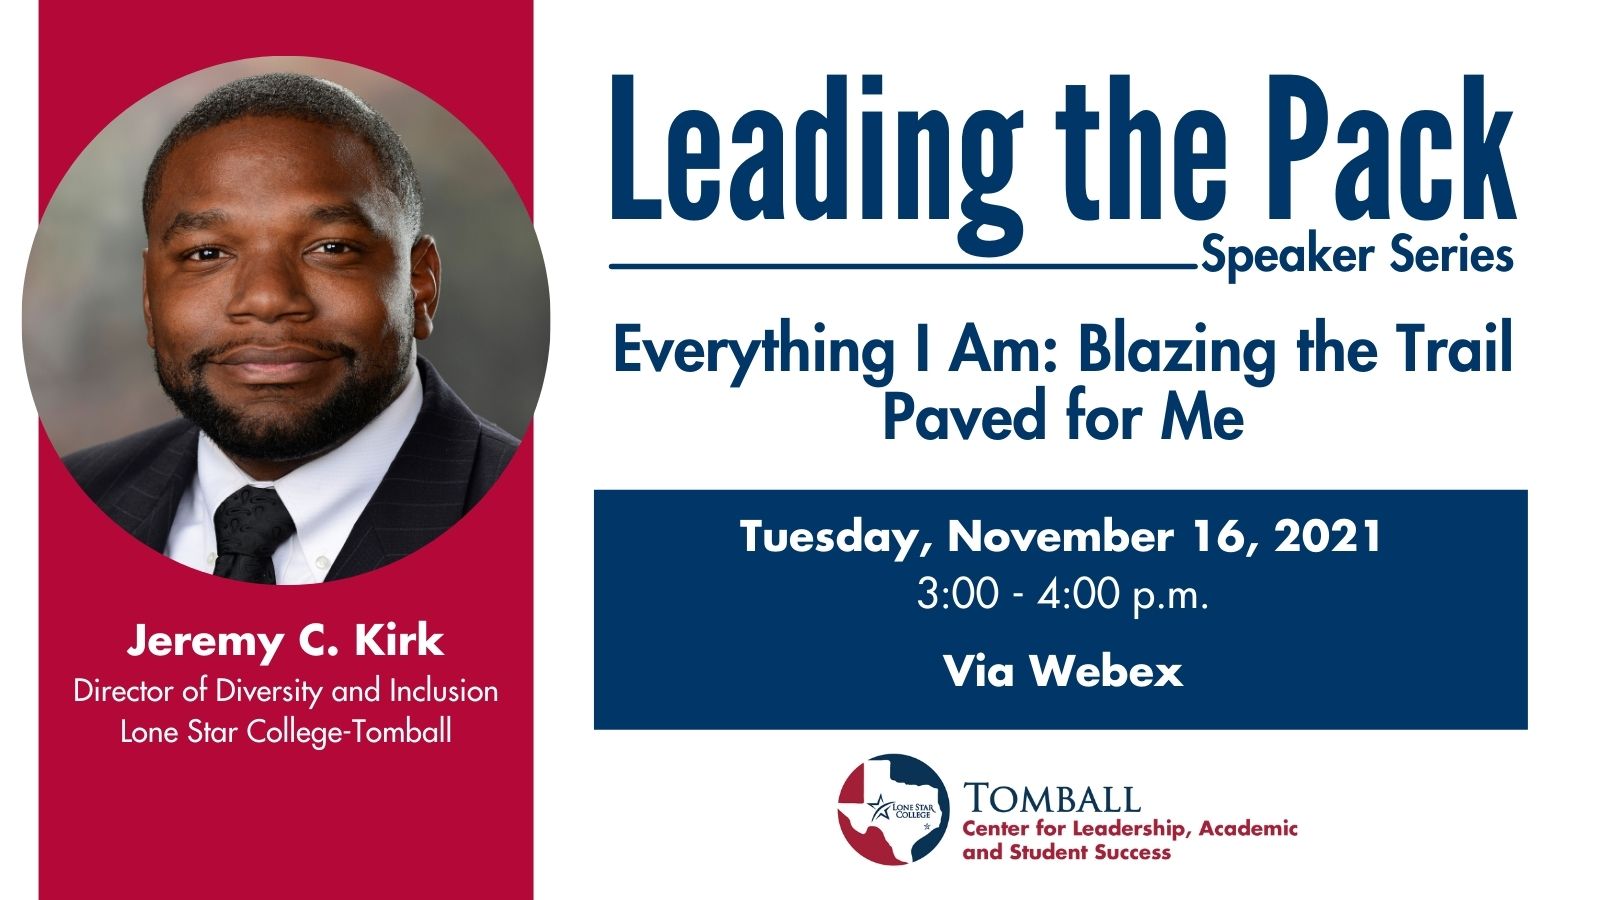 Leading the Pack -- Everything I Am: Blazing the Trail Paved for Me